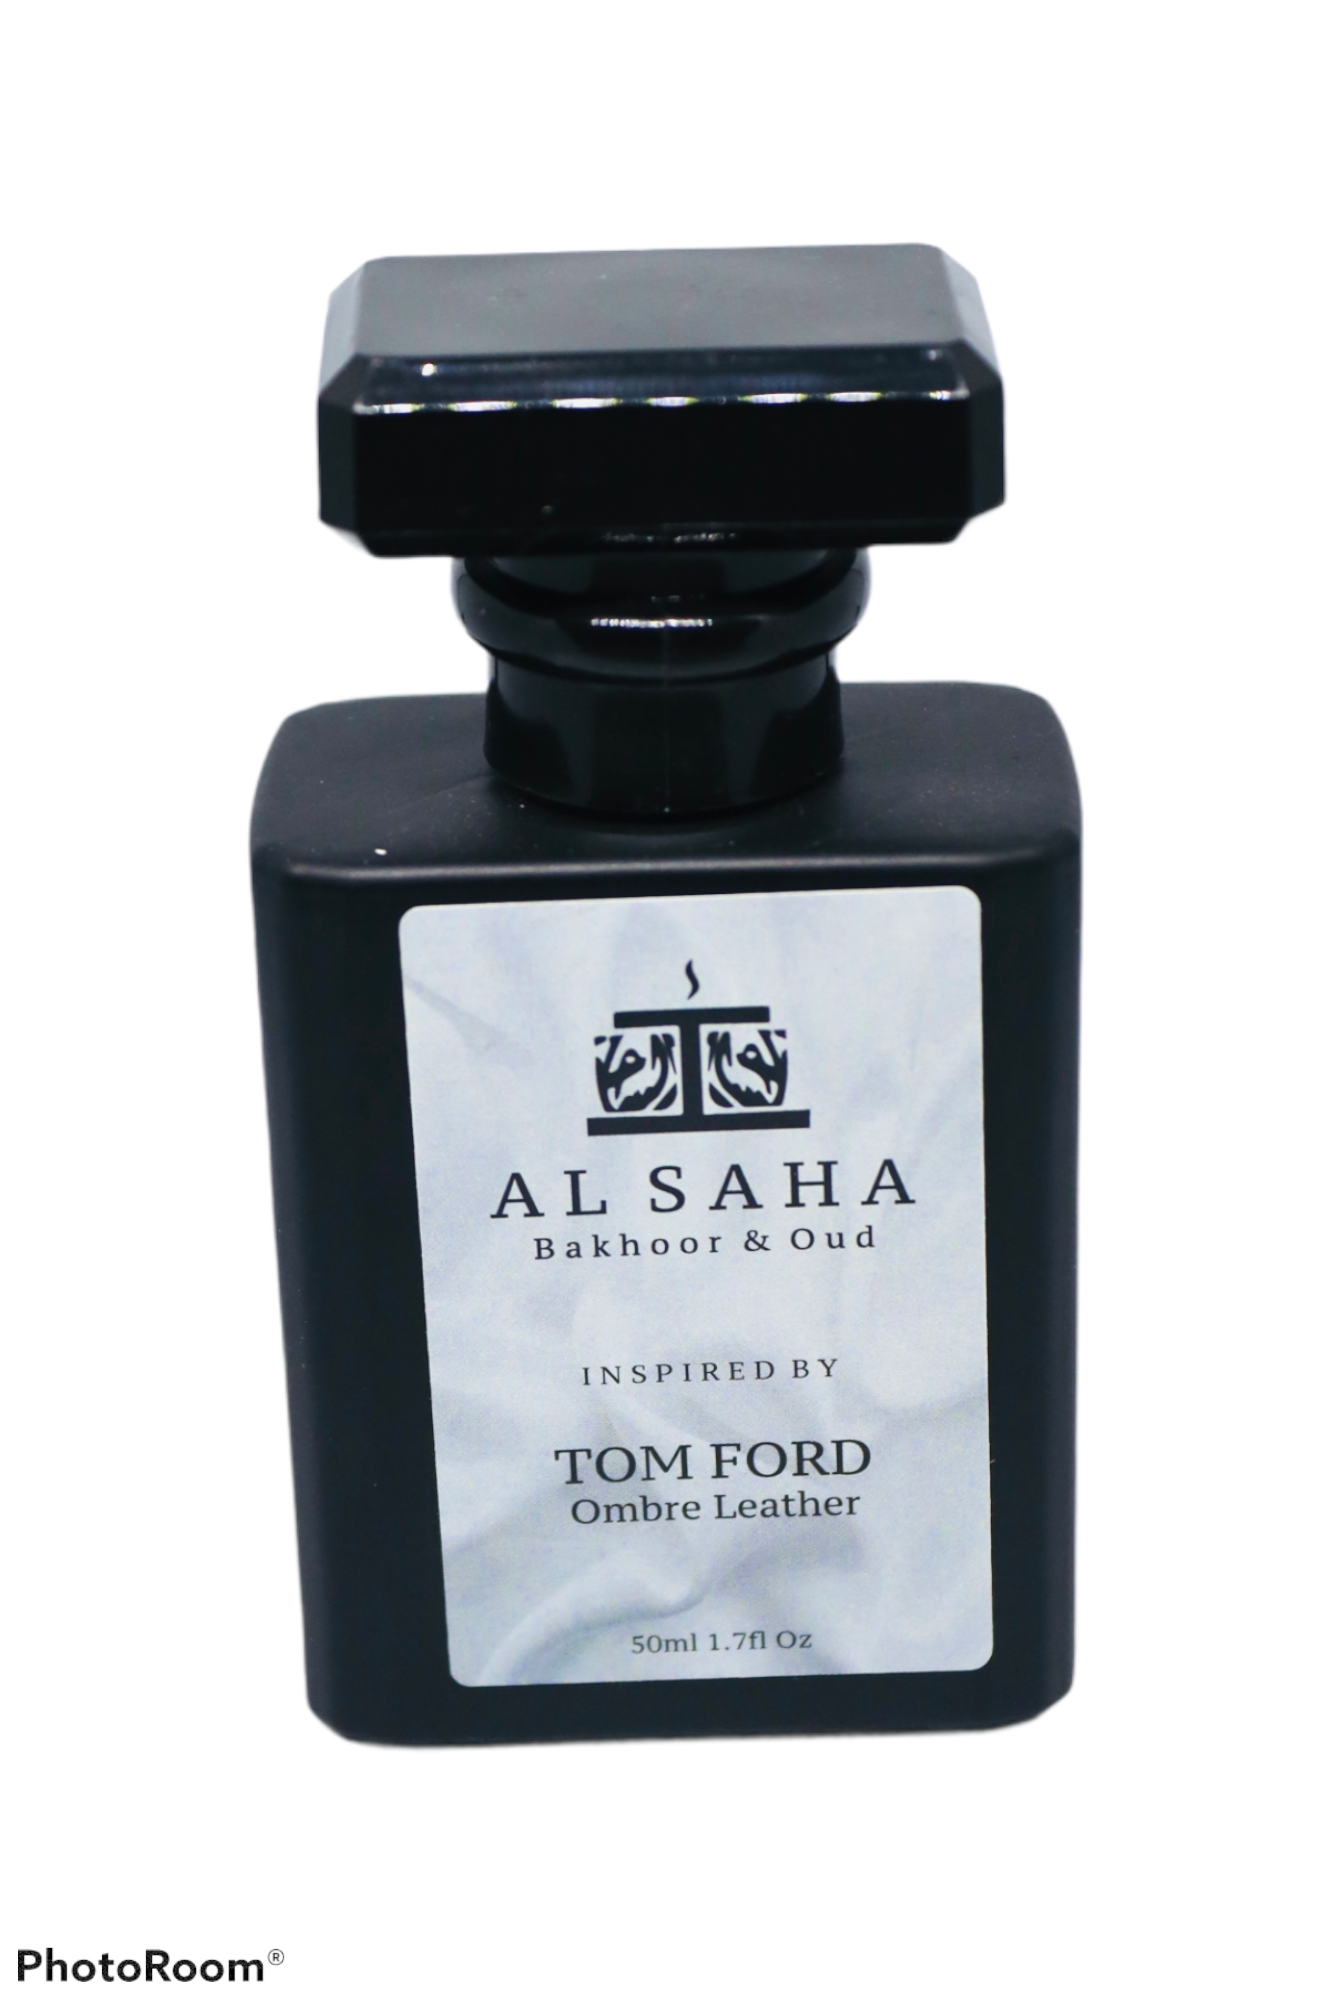 INSPIRED by TOM FORD OMBRE LEATHER - 50ML – Al-Saha Oud